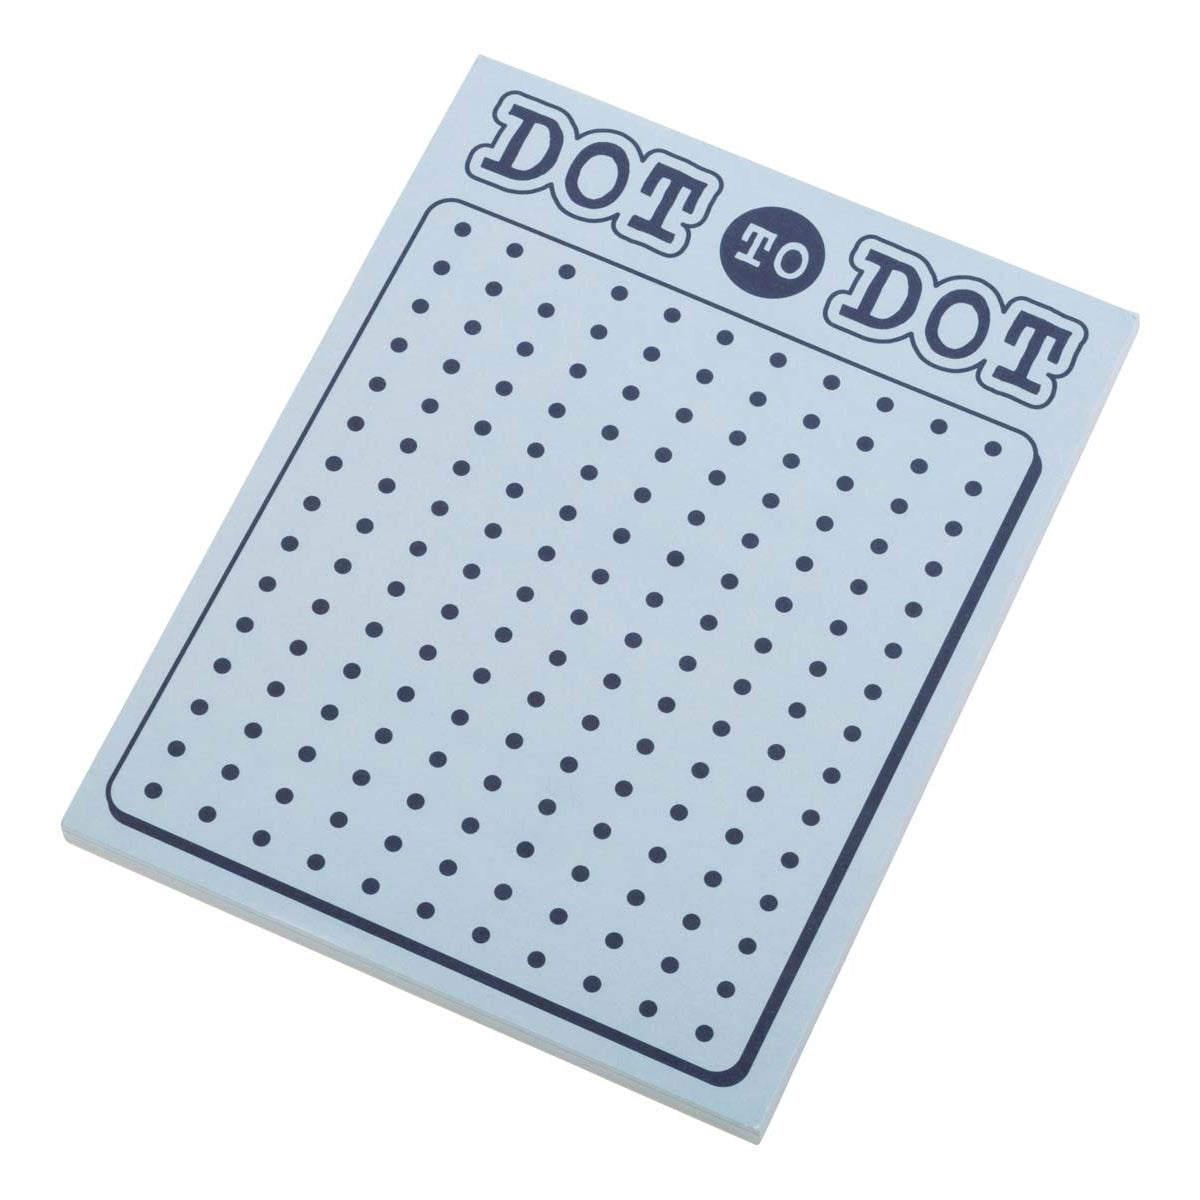 Classic Notepad Games - Dot To Dot